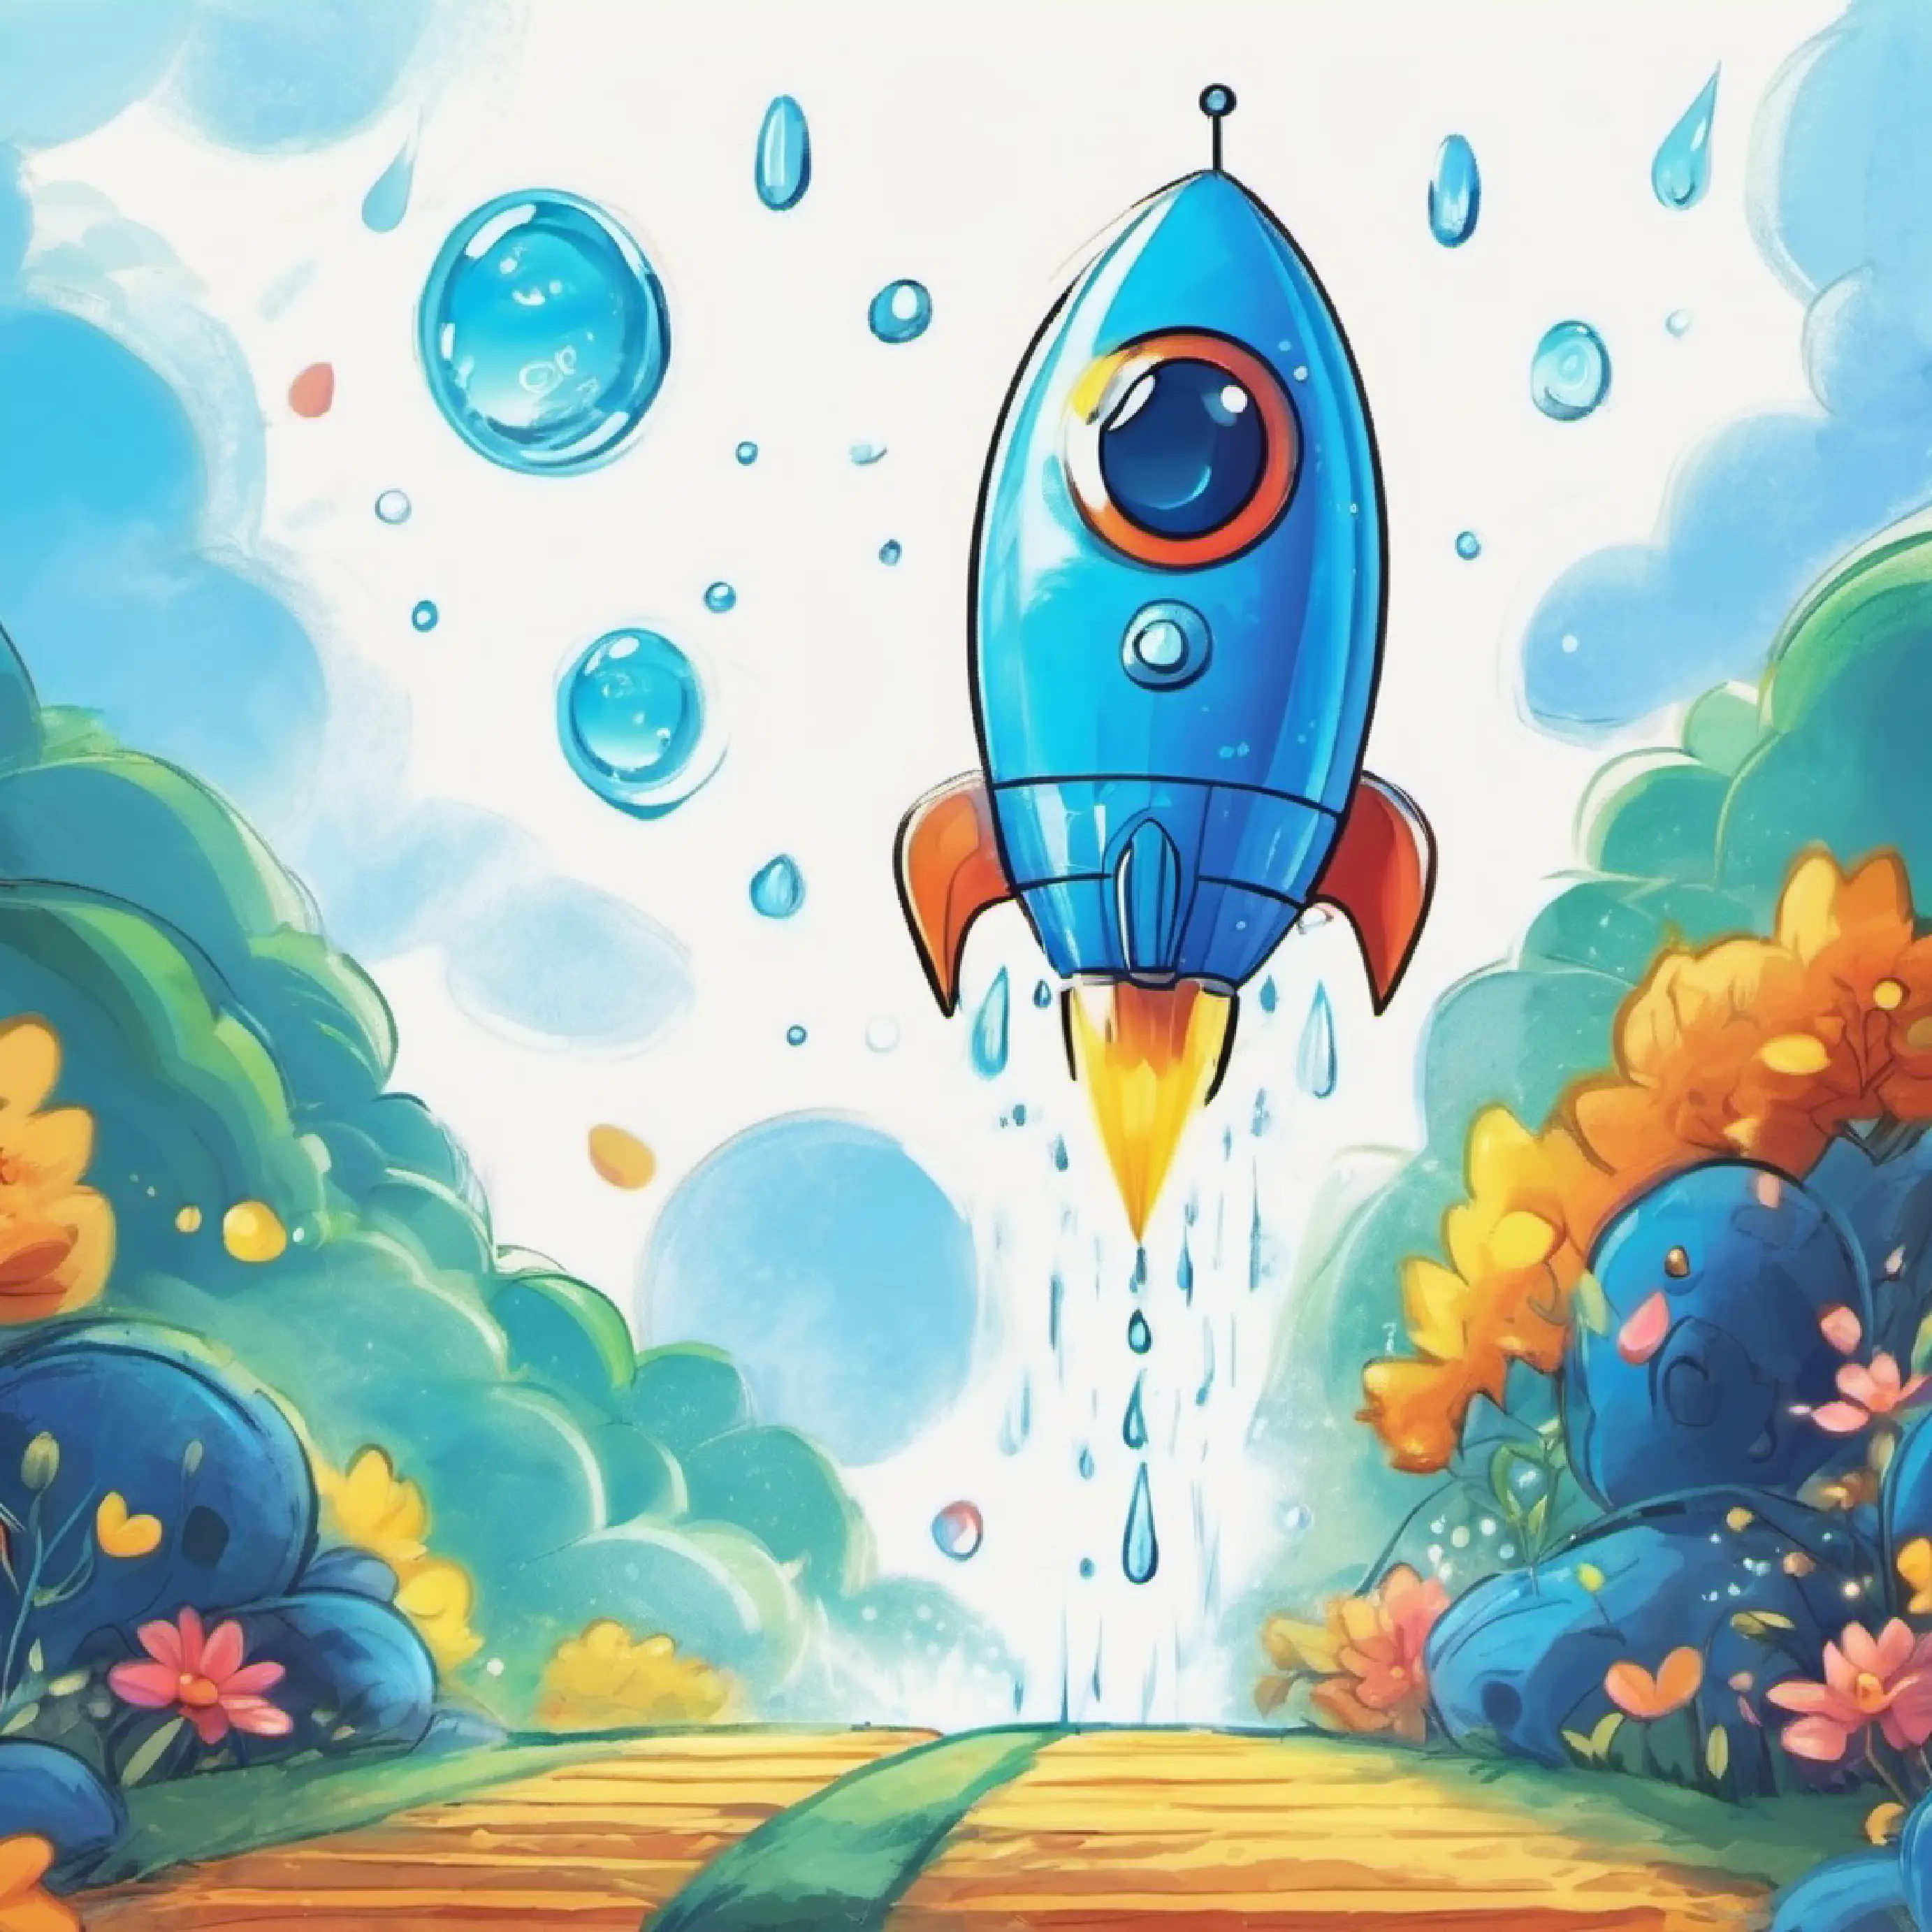 a droplet with sparkling blue eyes, cheerful and energetic's dream about becoming steam.